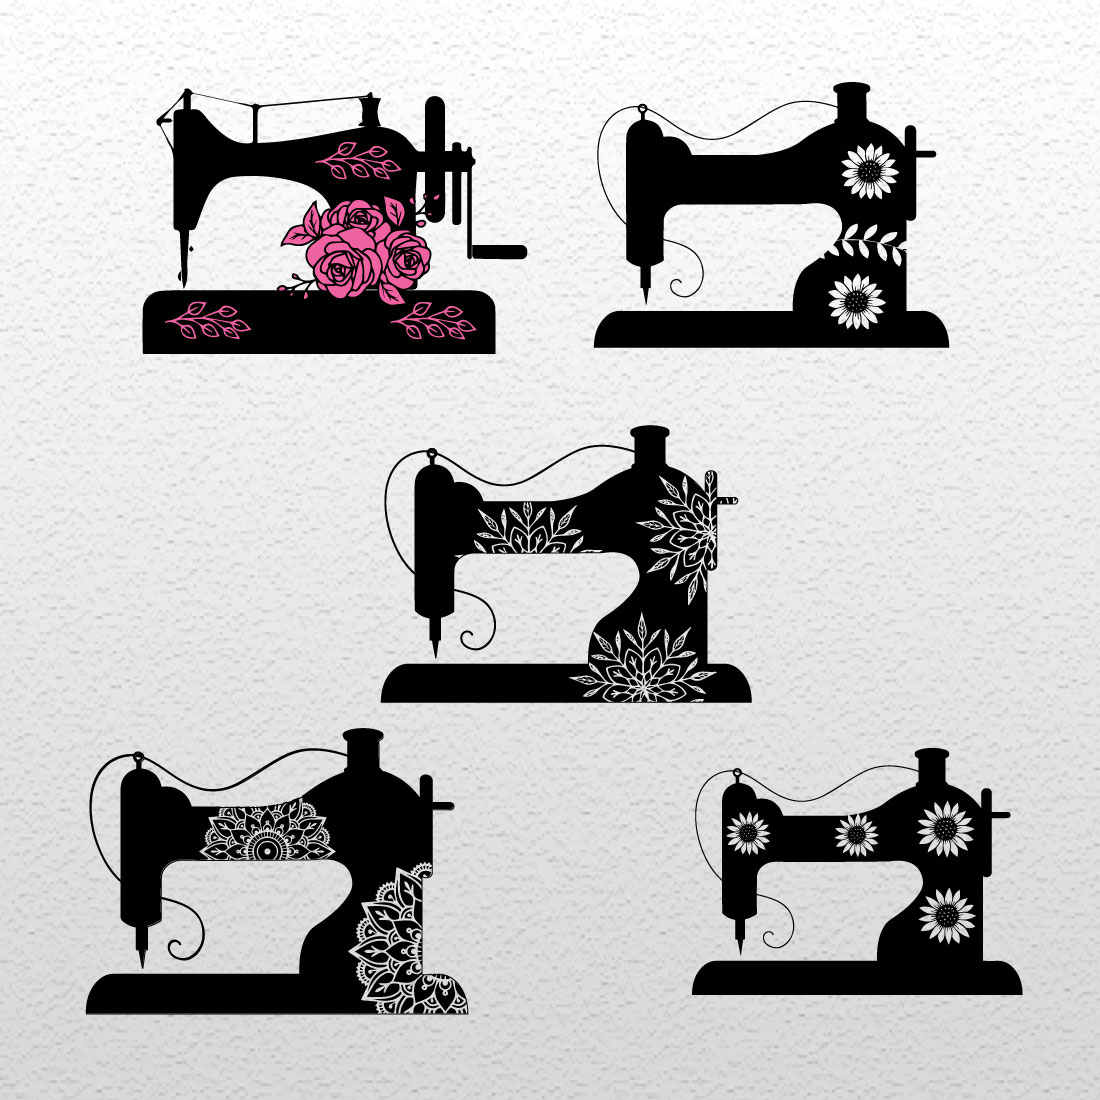 A pack of amazing images of silhouettes of sewing machines